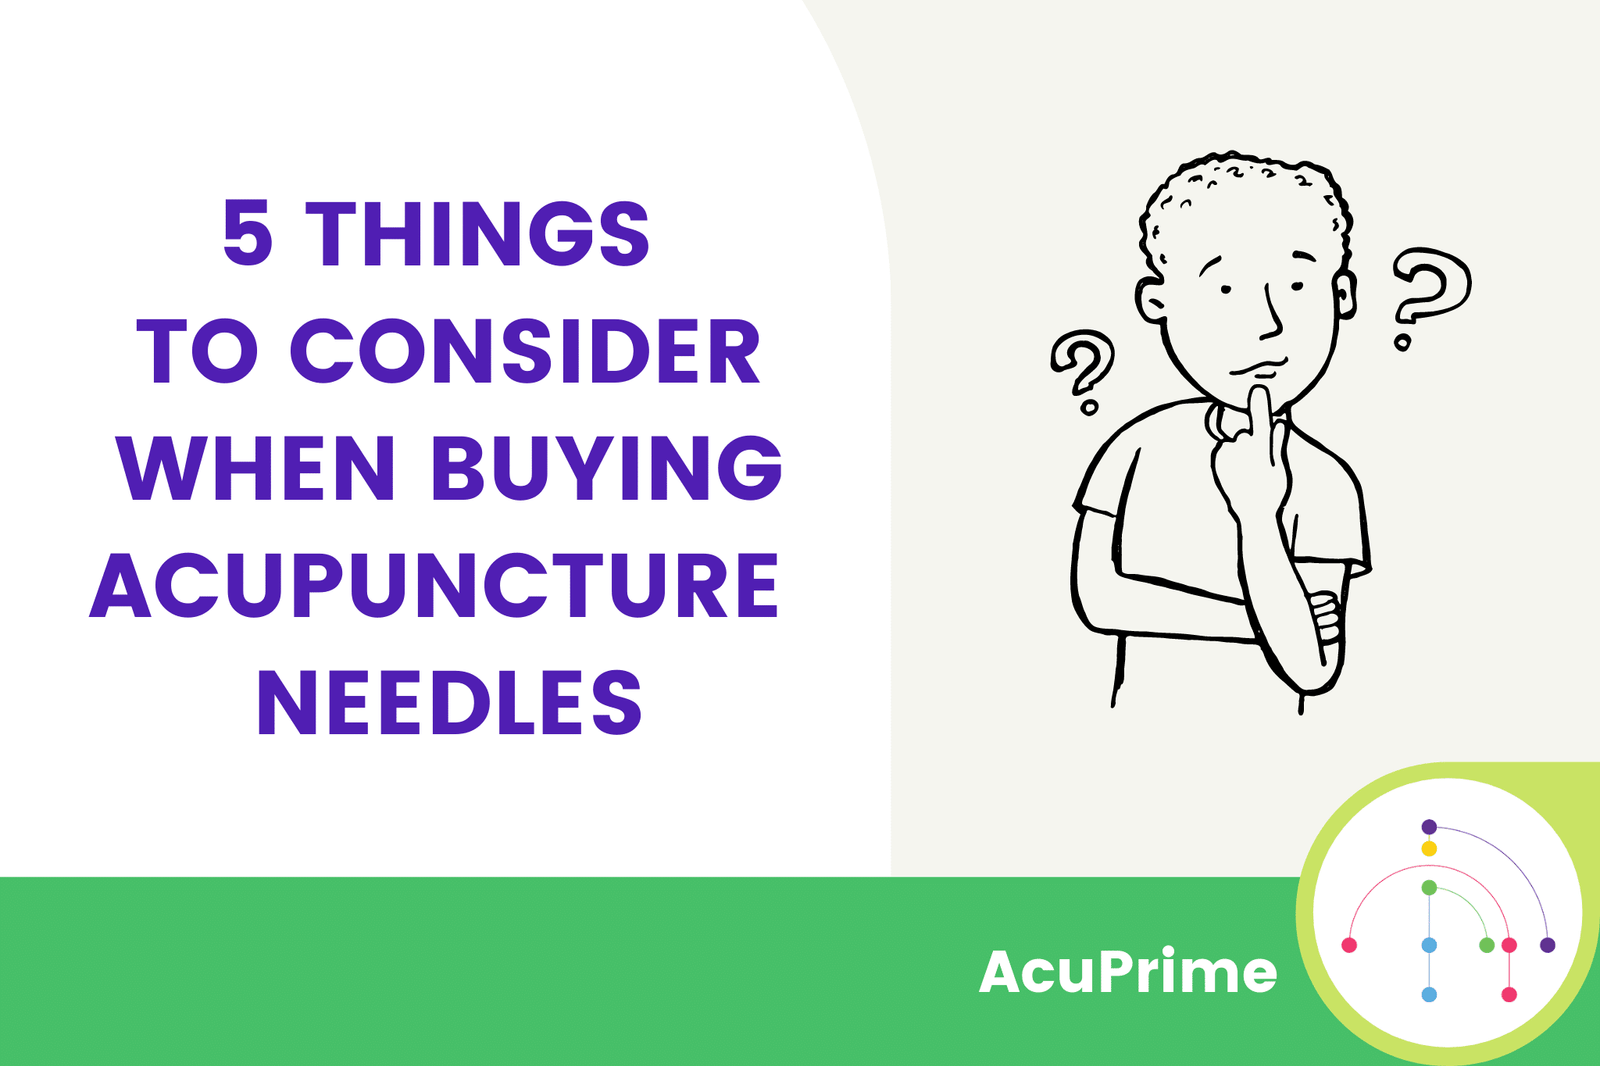 5 Things to Consider When Buying Acupuncture Needles - AcuPrime